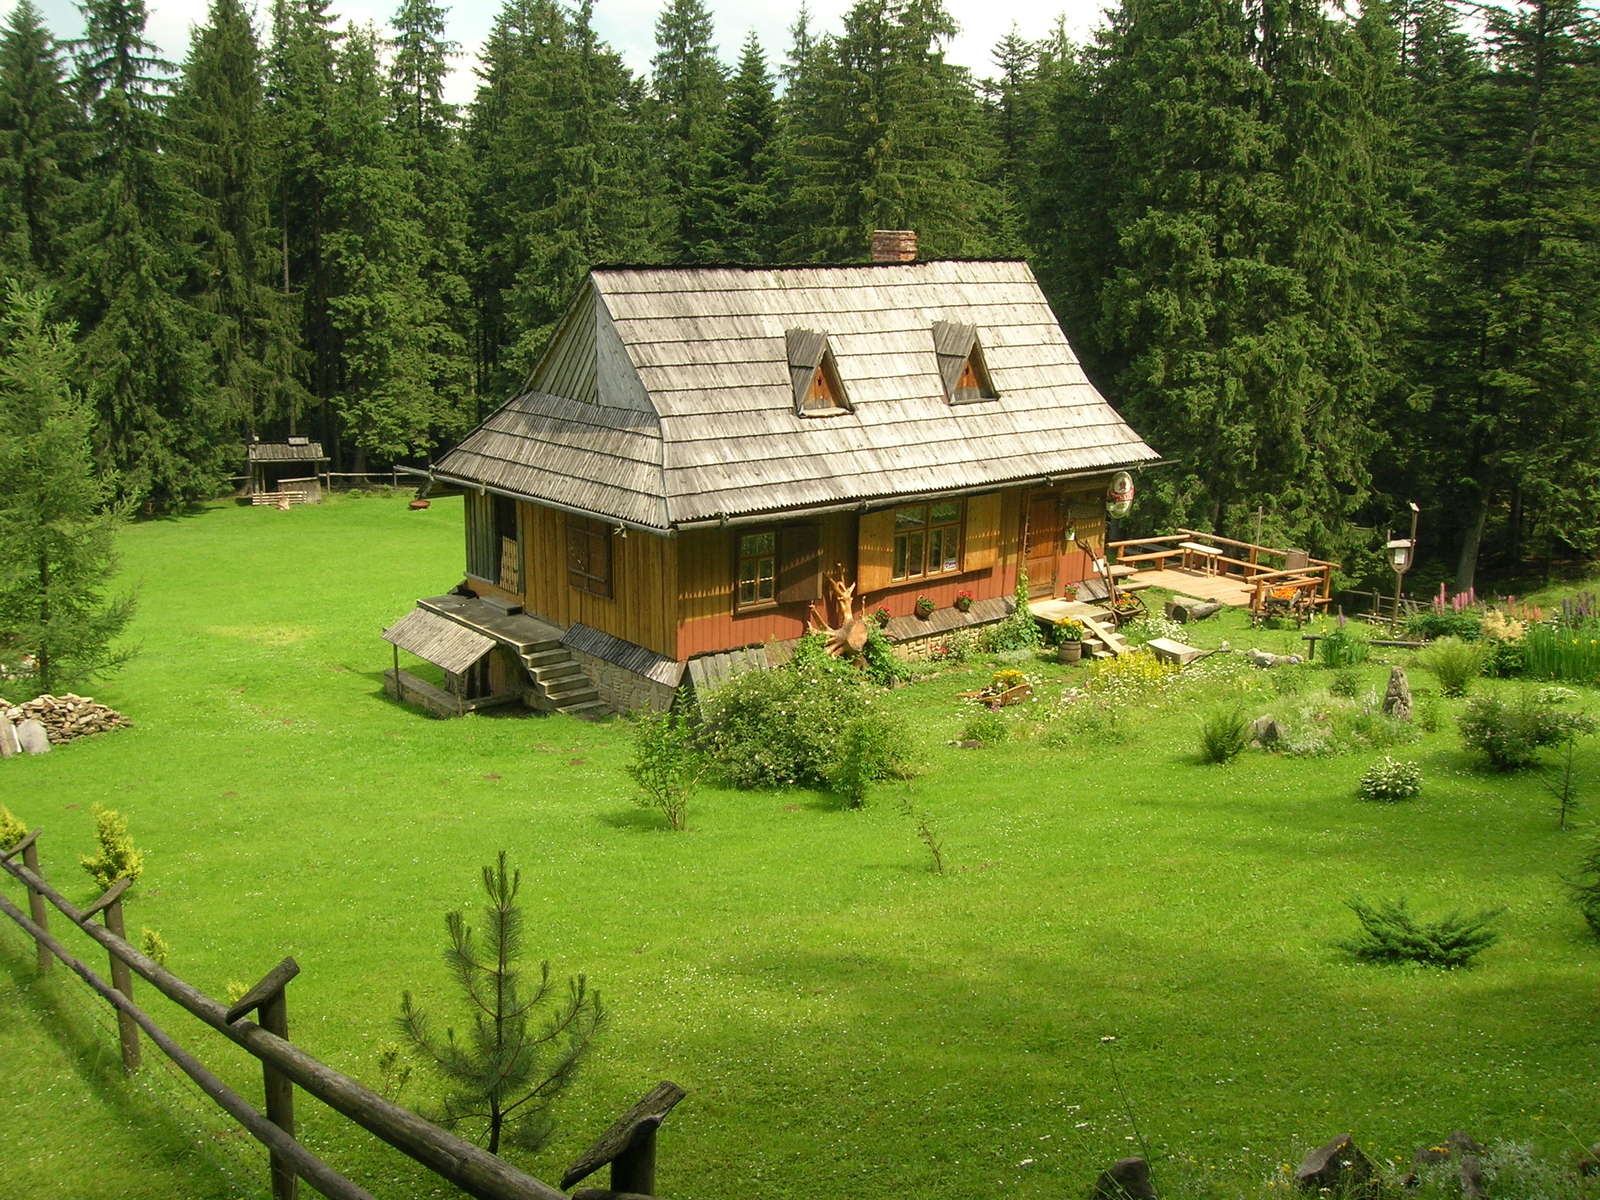 a small log cabin is seen in the green, grassy field